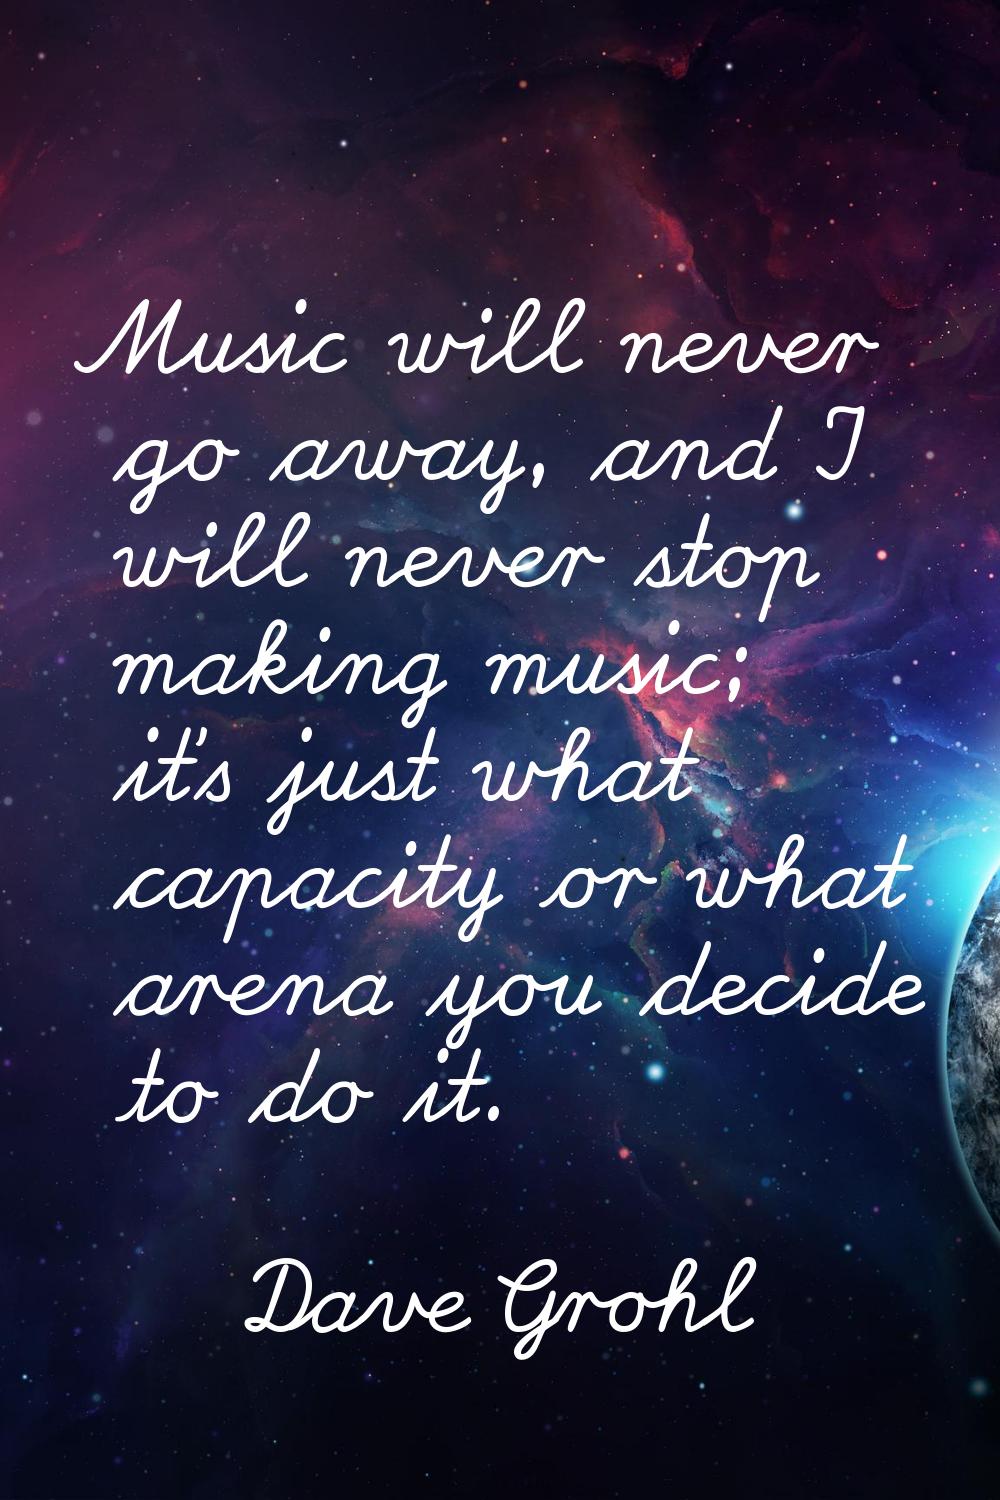 Music will never go away, and I will never stop making music; it's just what capacity or what arena